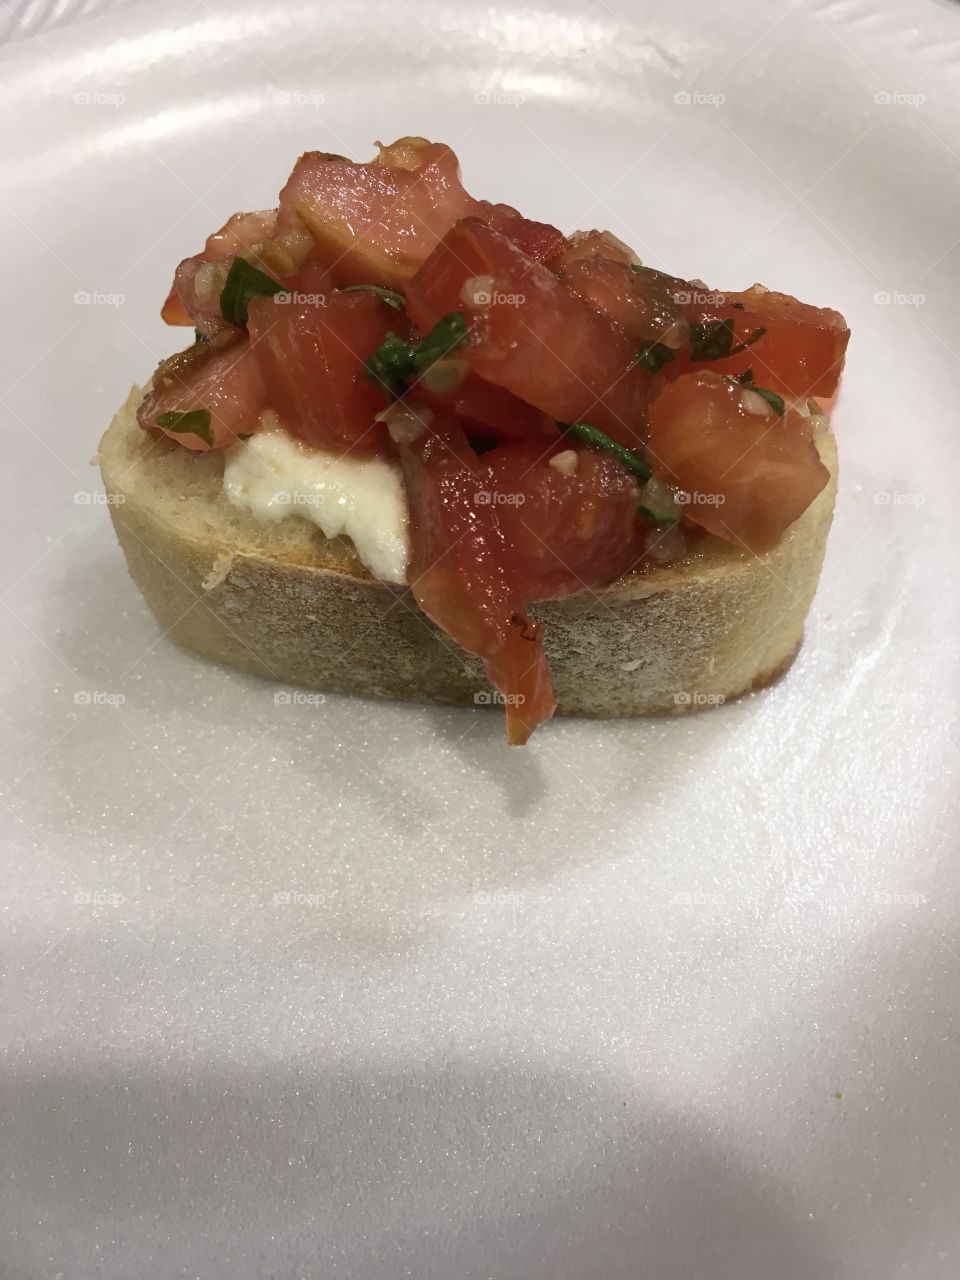 Homemade Bruschetta with melted cheese on French bread